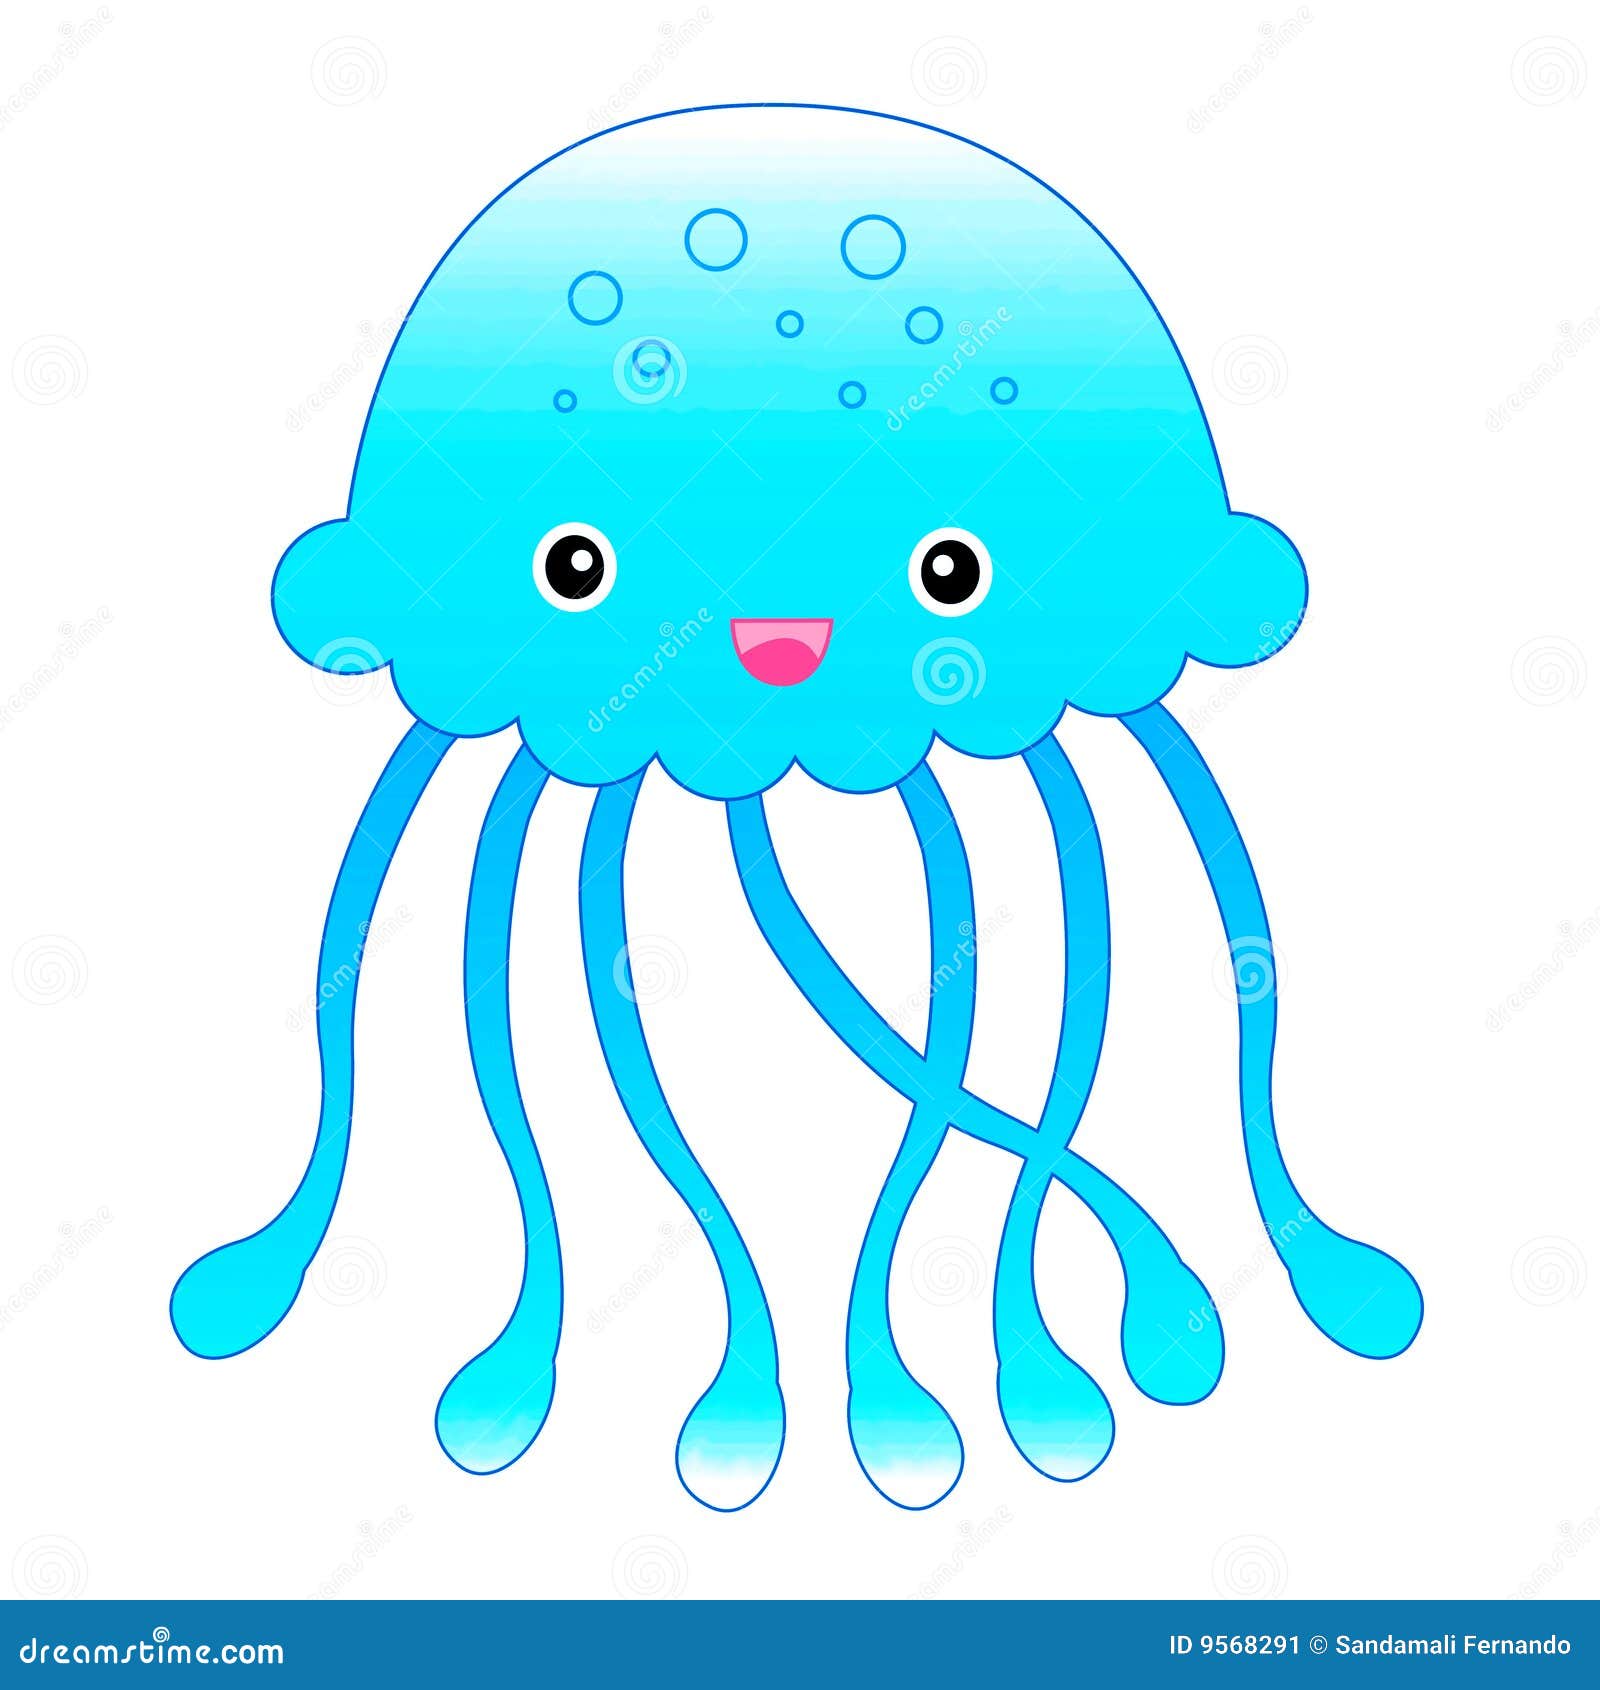 jellyfish clipart images - photo #28